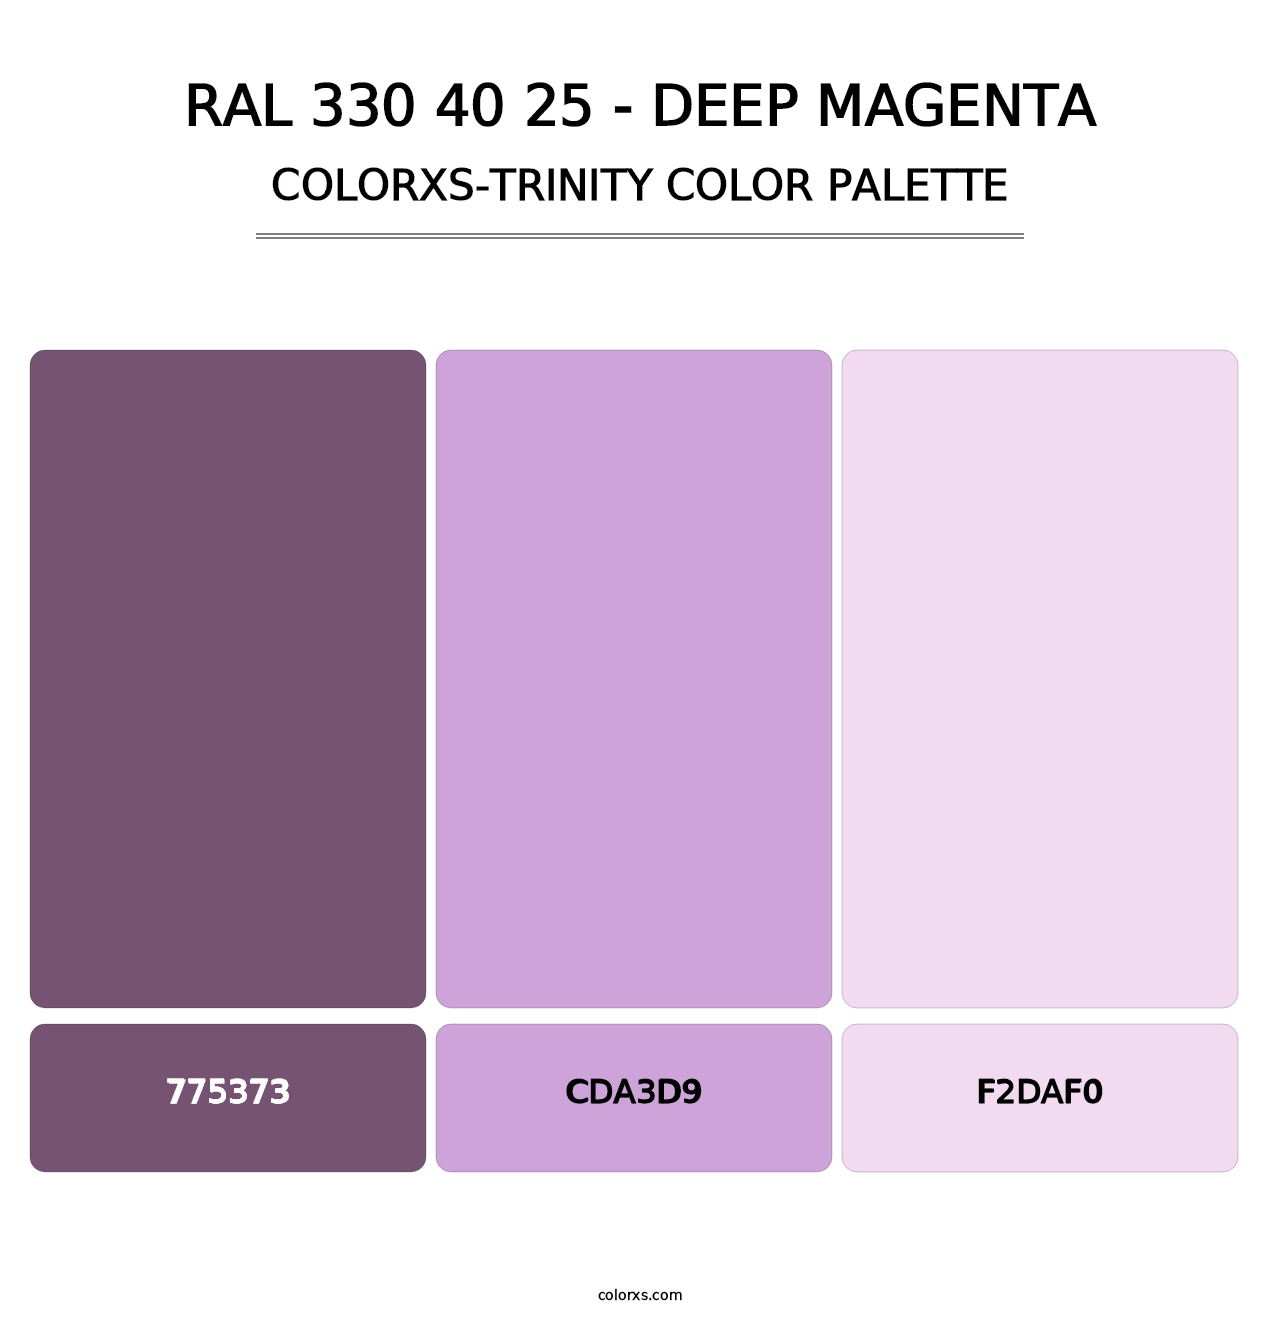 RAL 330 40 25 - Deep Magenta - Colorxs Trinity Palette